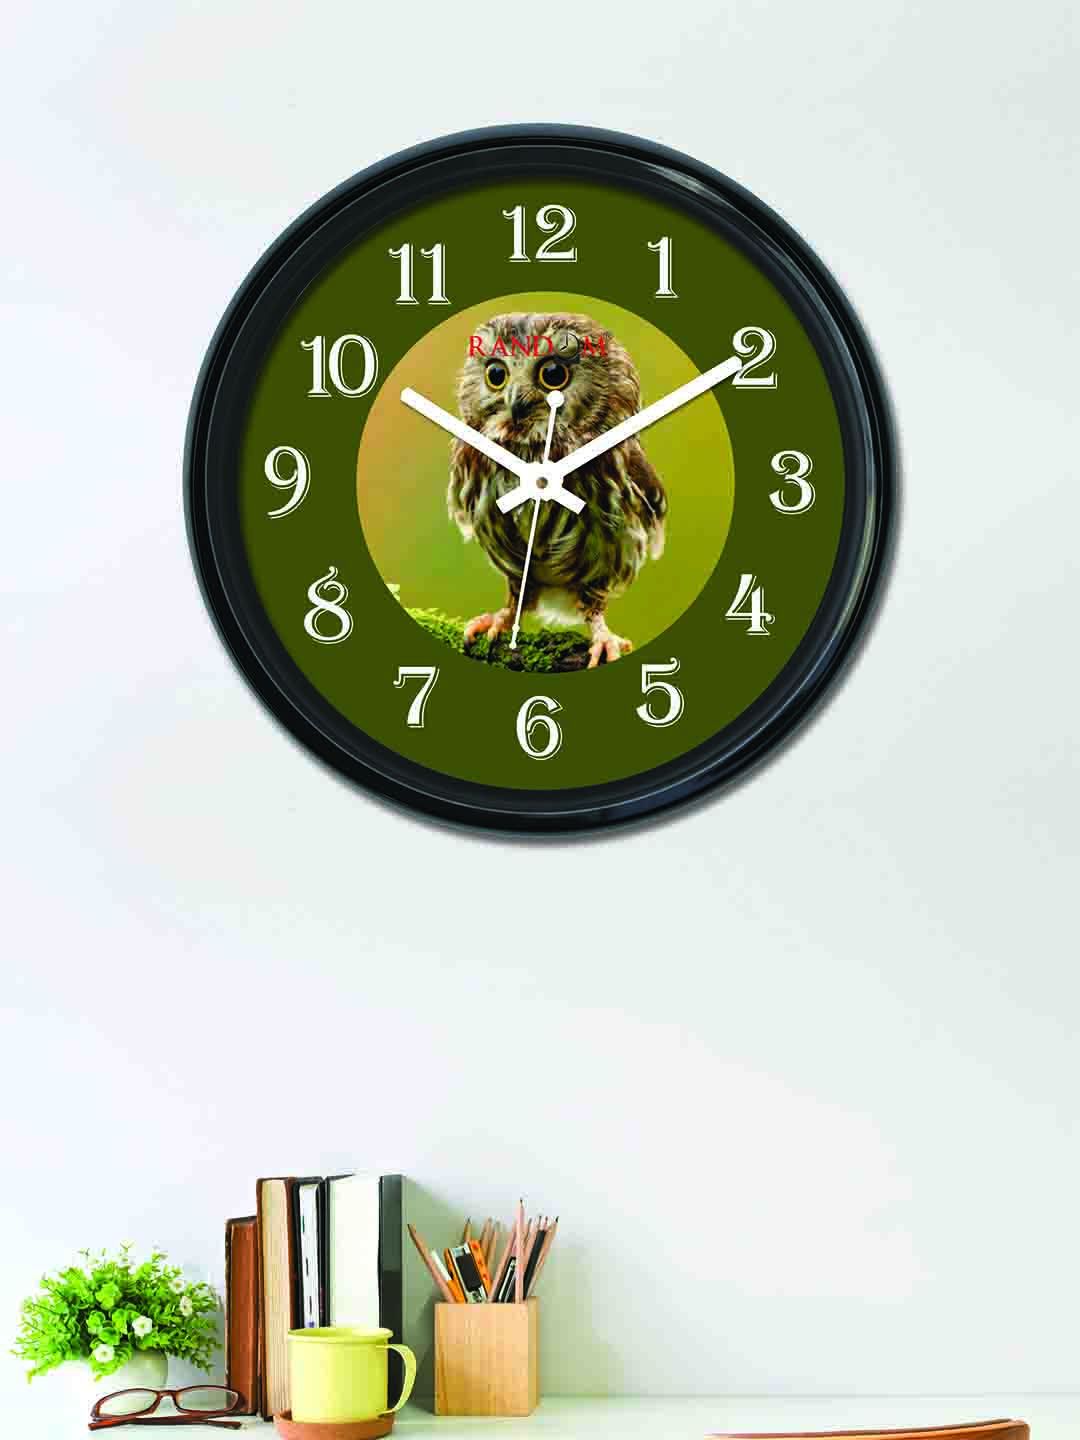 RANDOM Olive Green Round Printed Analogue Wall Clock 30 cm Price in India